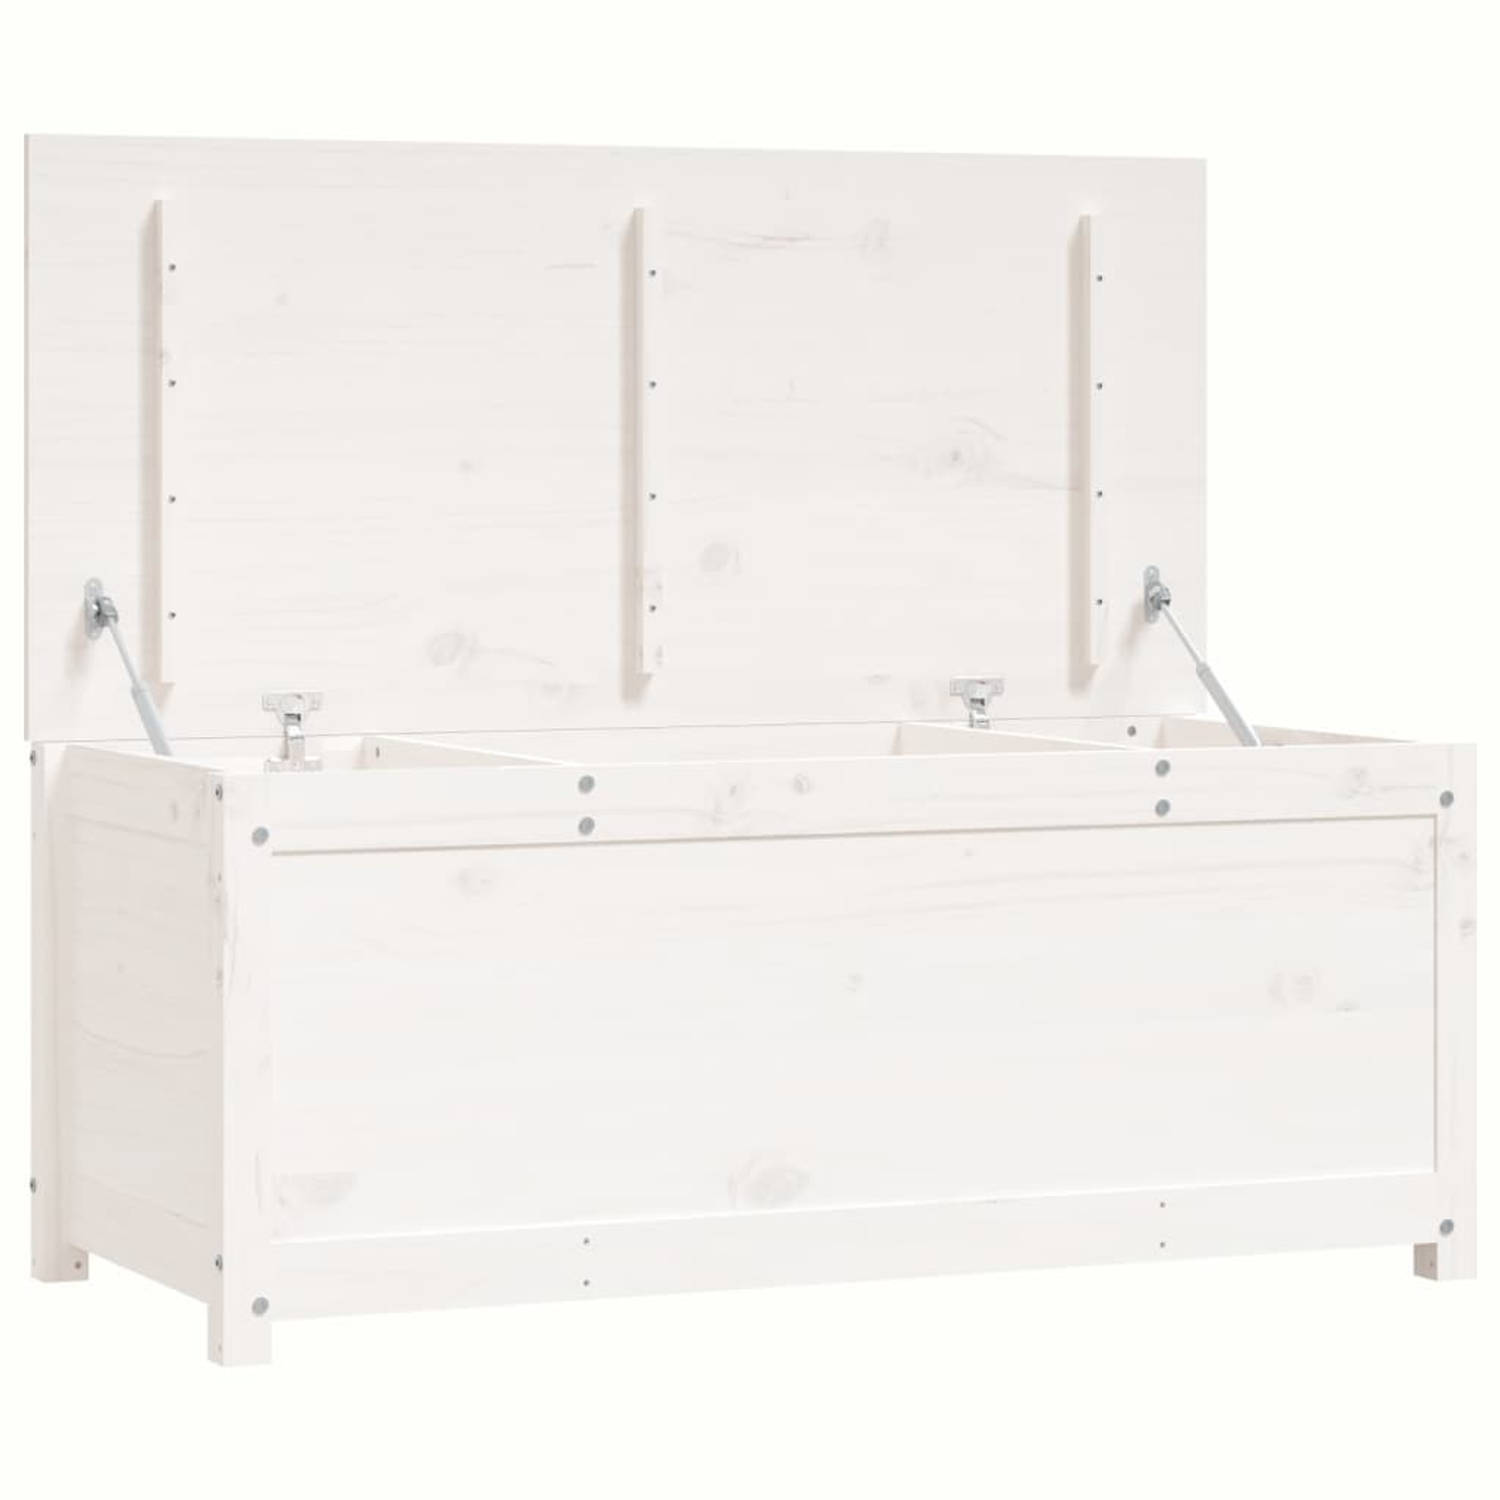 The Living Store Opbergdoos Massief Grenenhout - 110 x 50 x 45.5 cm - Wit